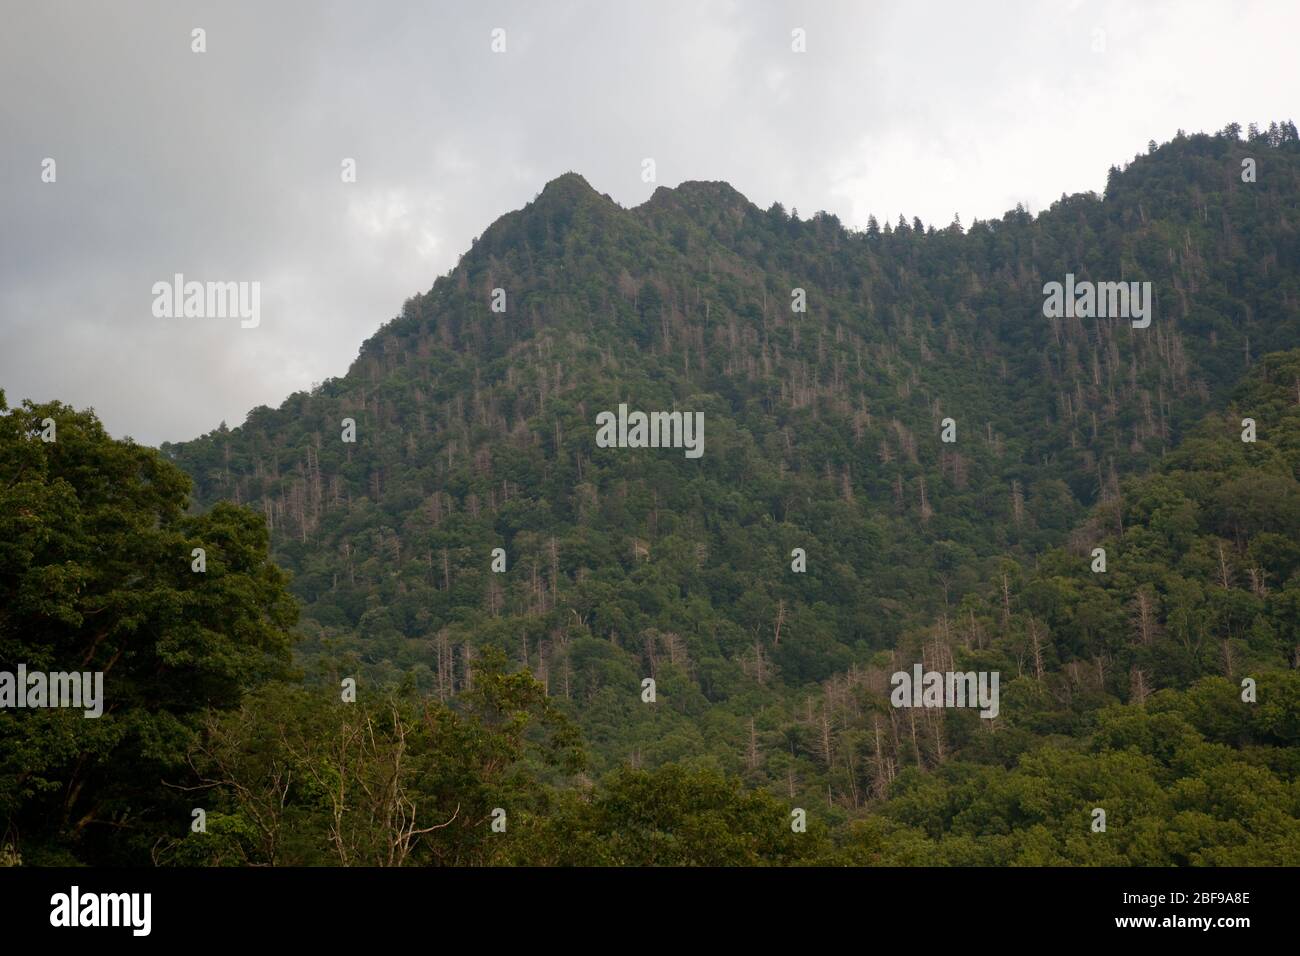 Distant Mountains with trees Stock Photo